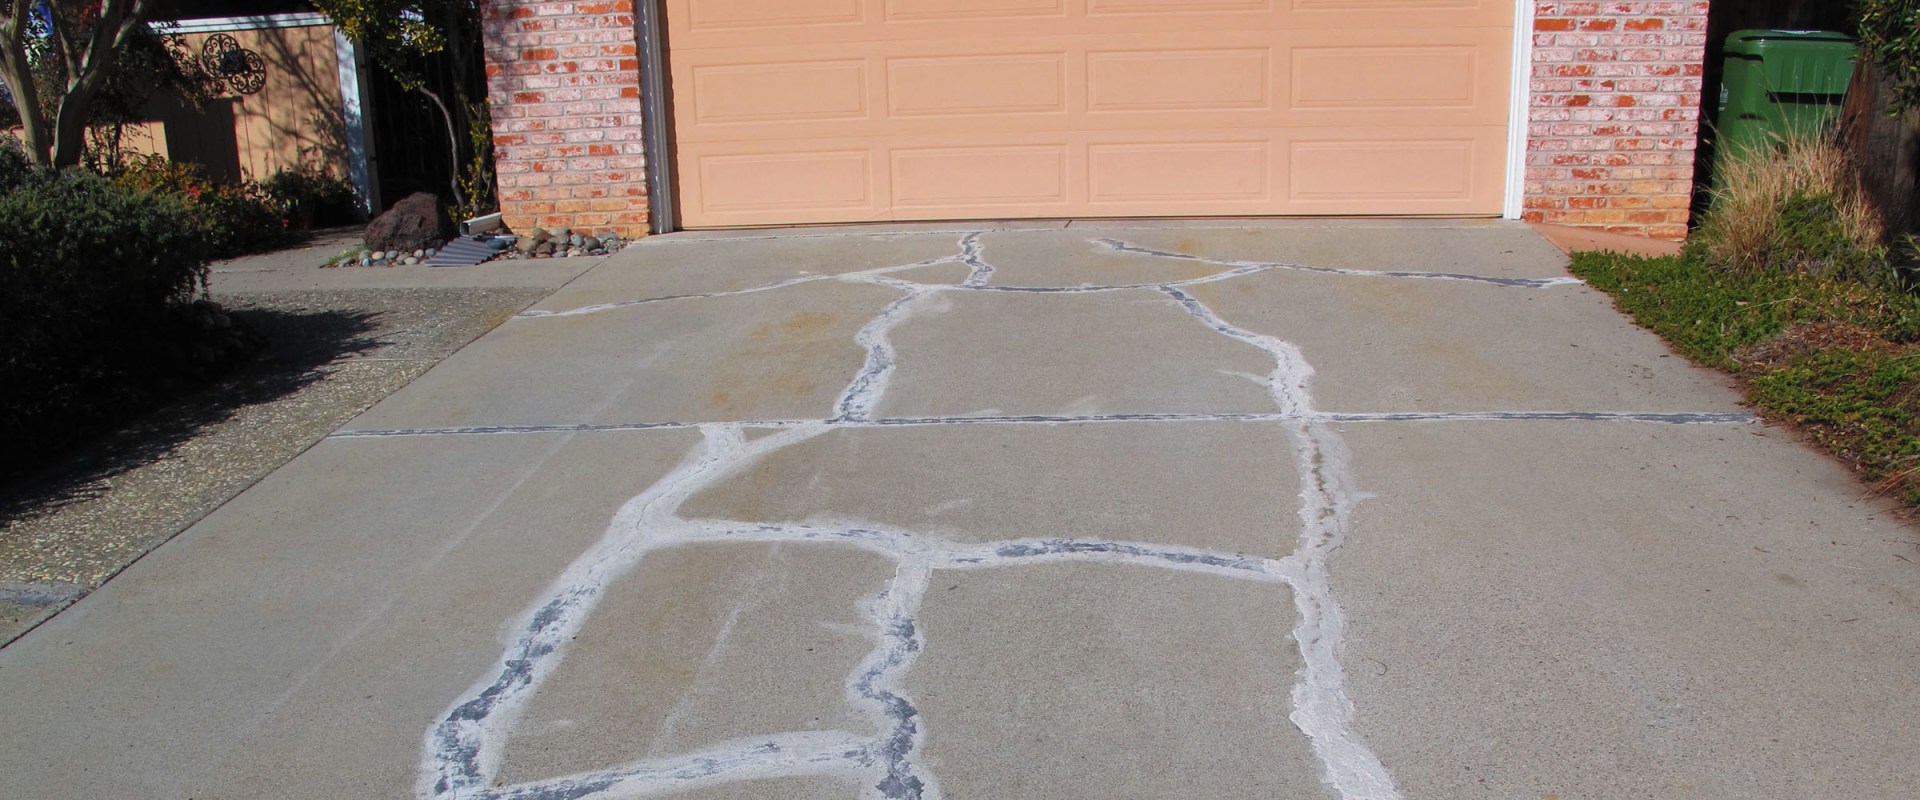 Can a Cracked Concrete Driveway Be Resurfaced?